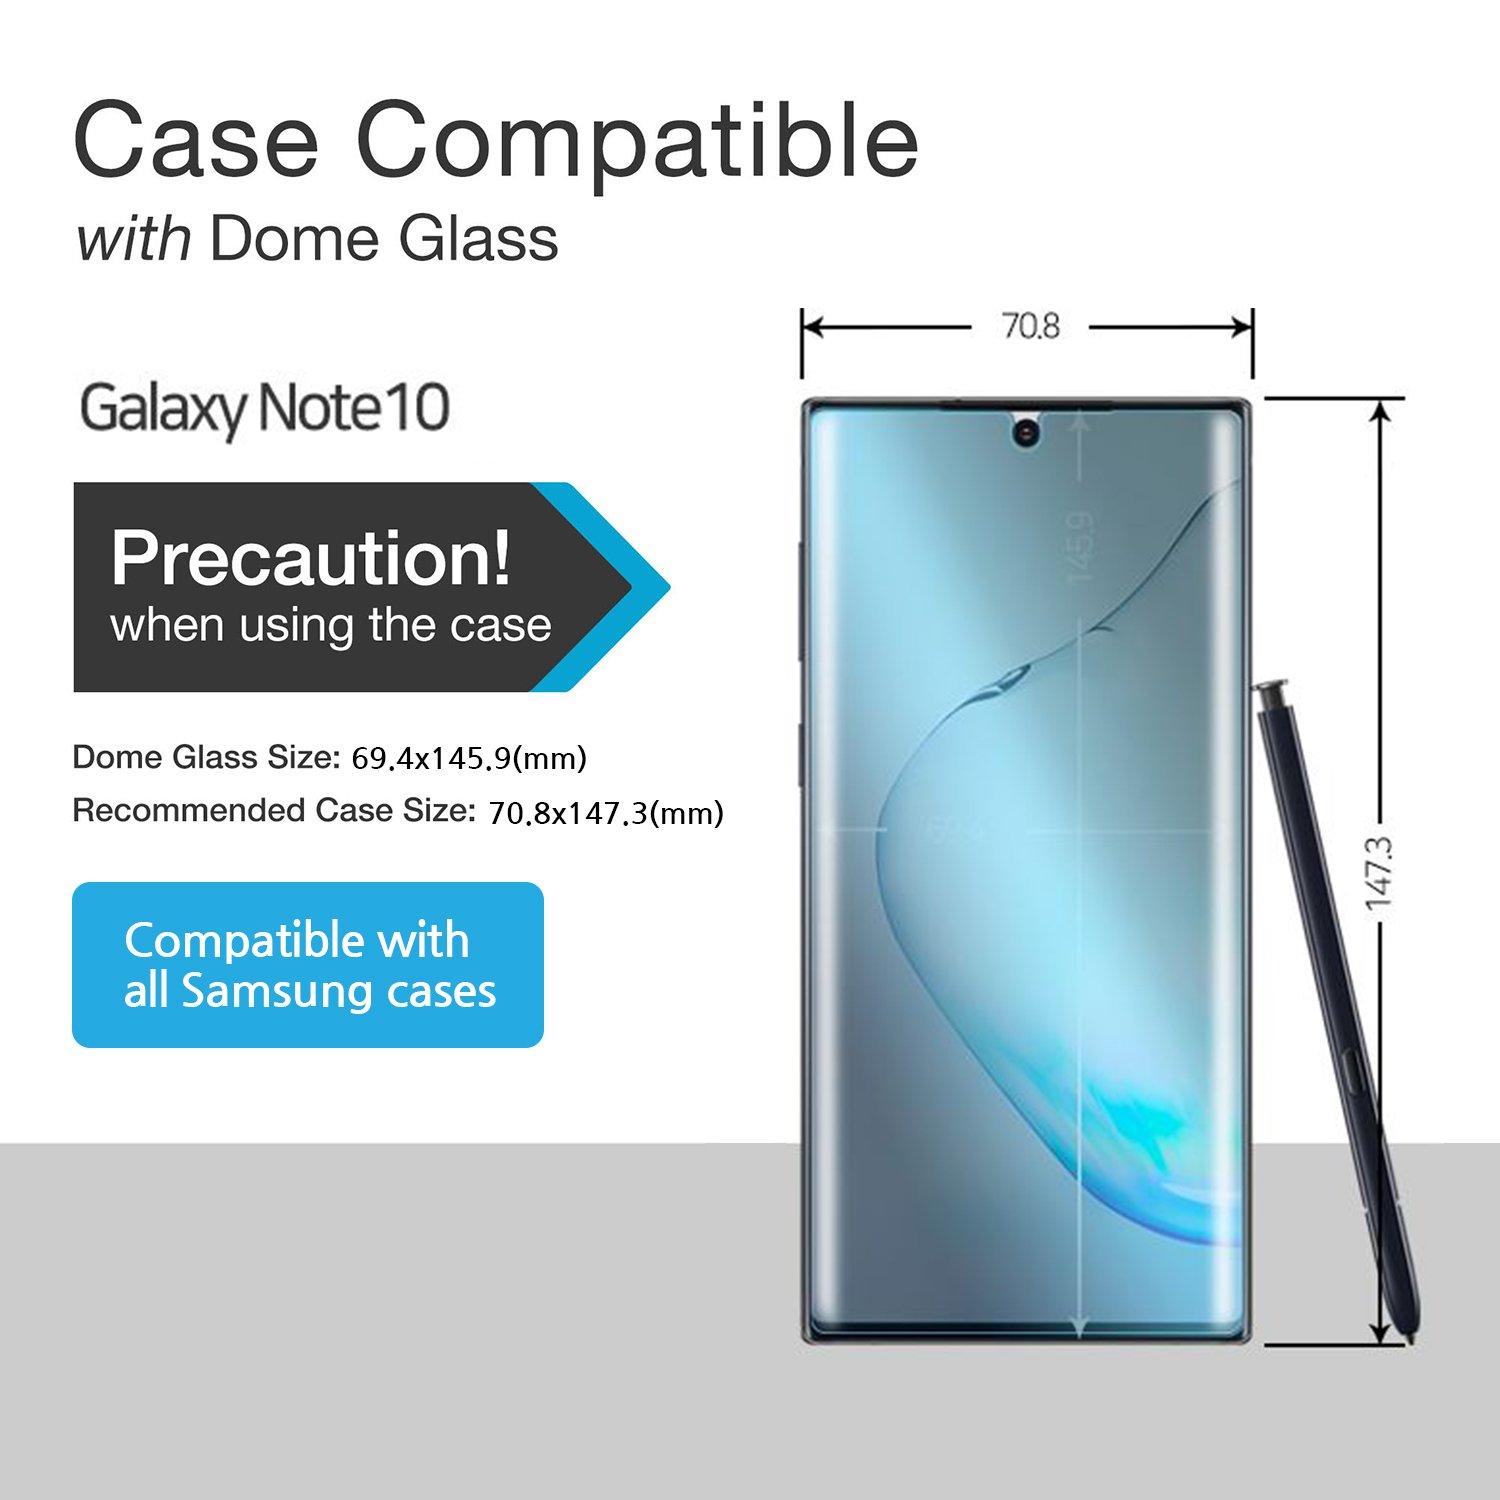 Dome Glass Screen Protector Galaxy Note 10